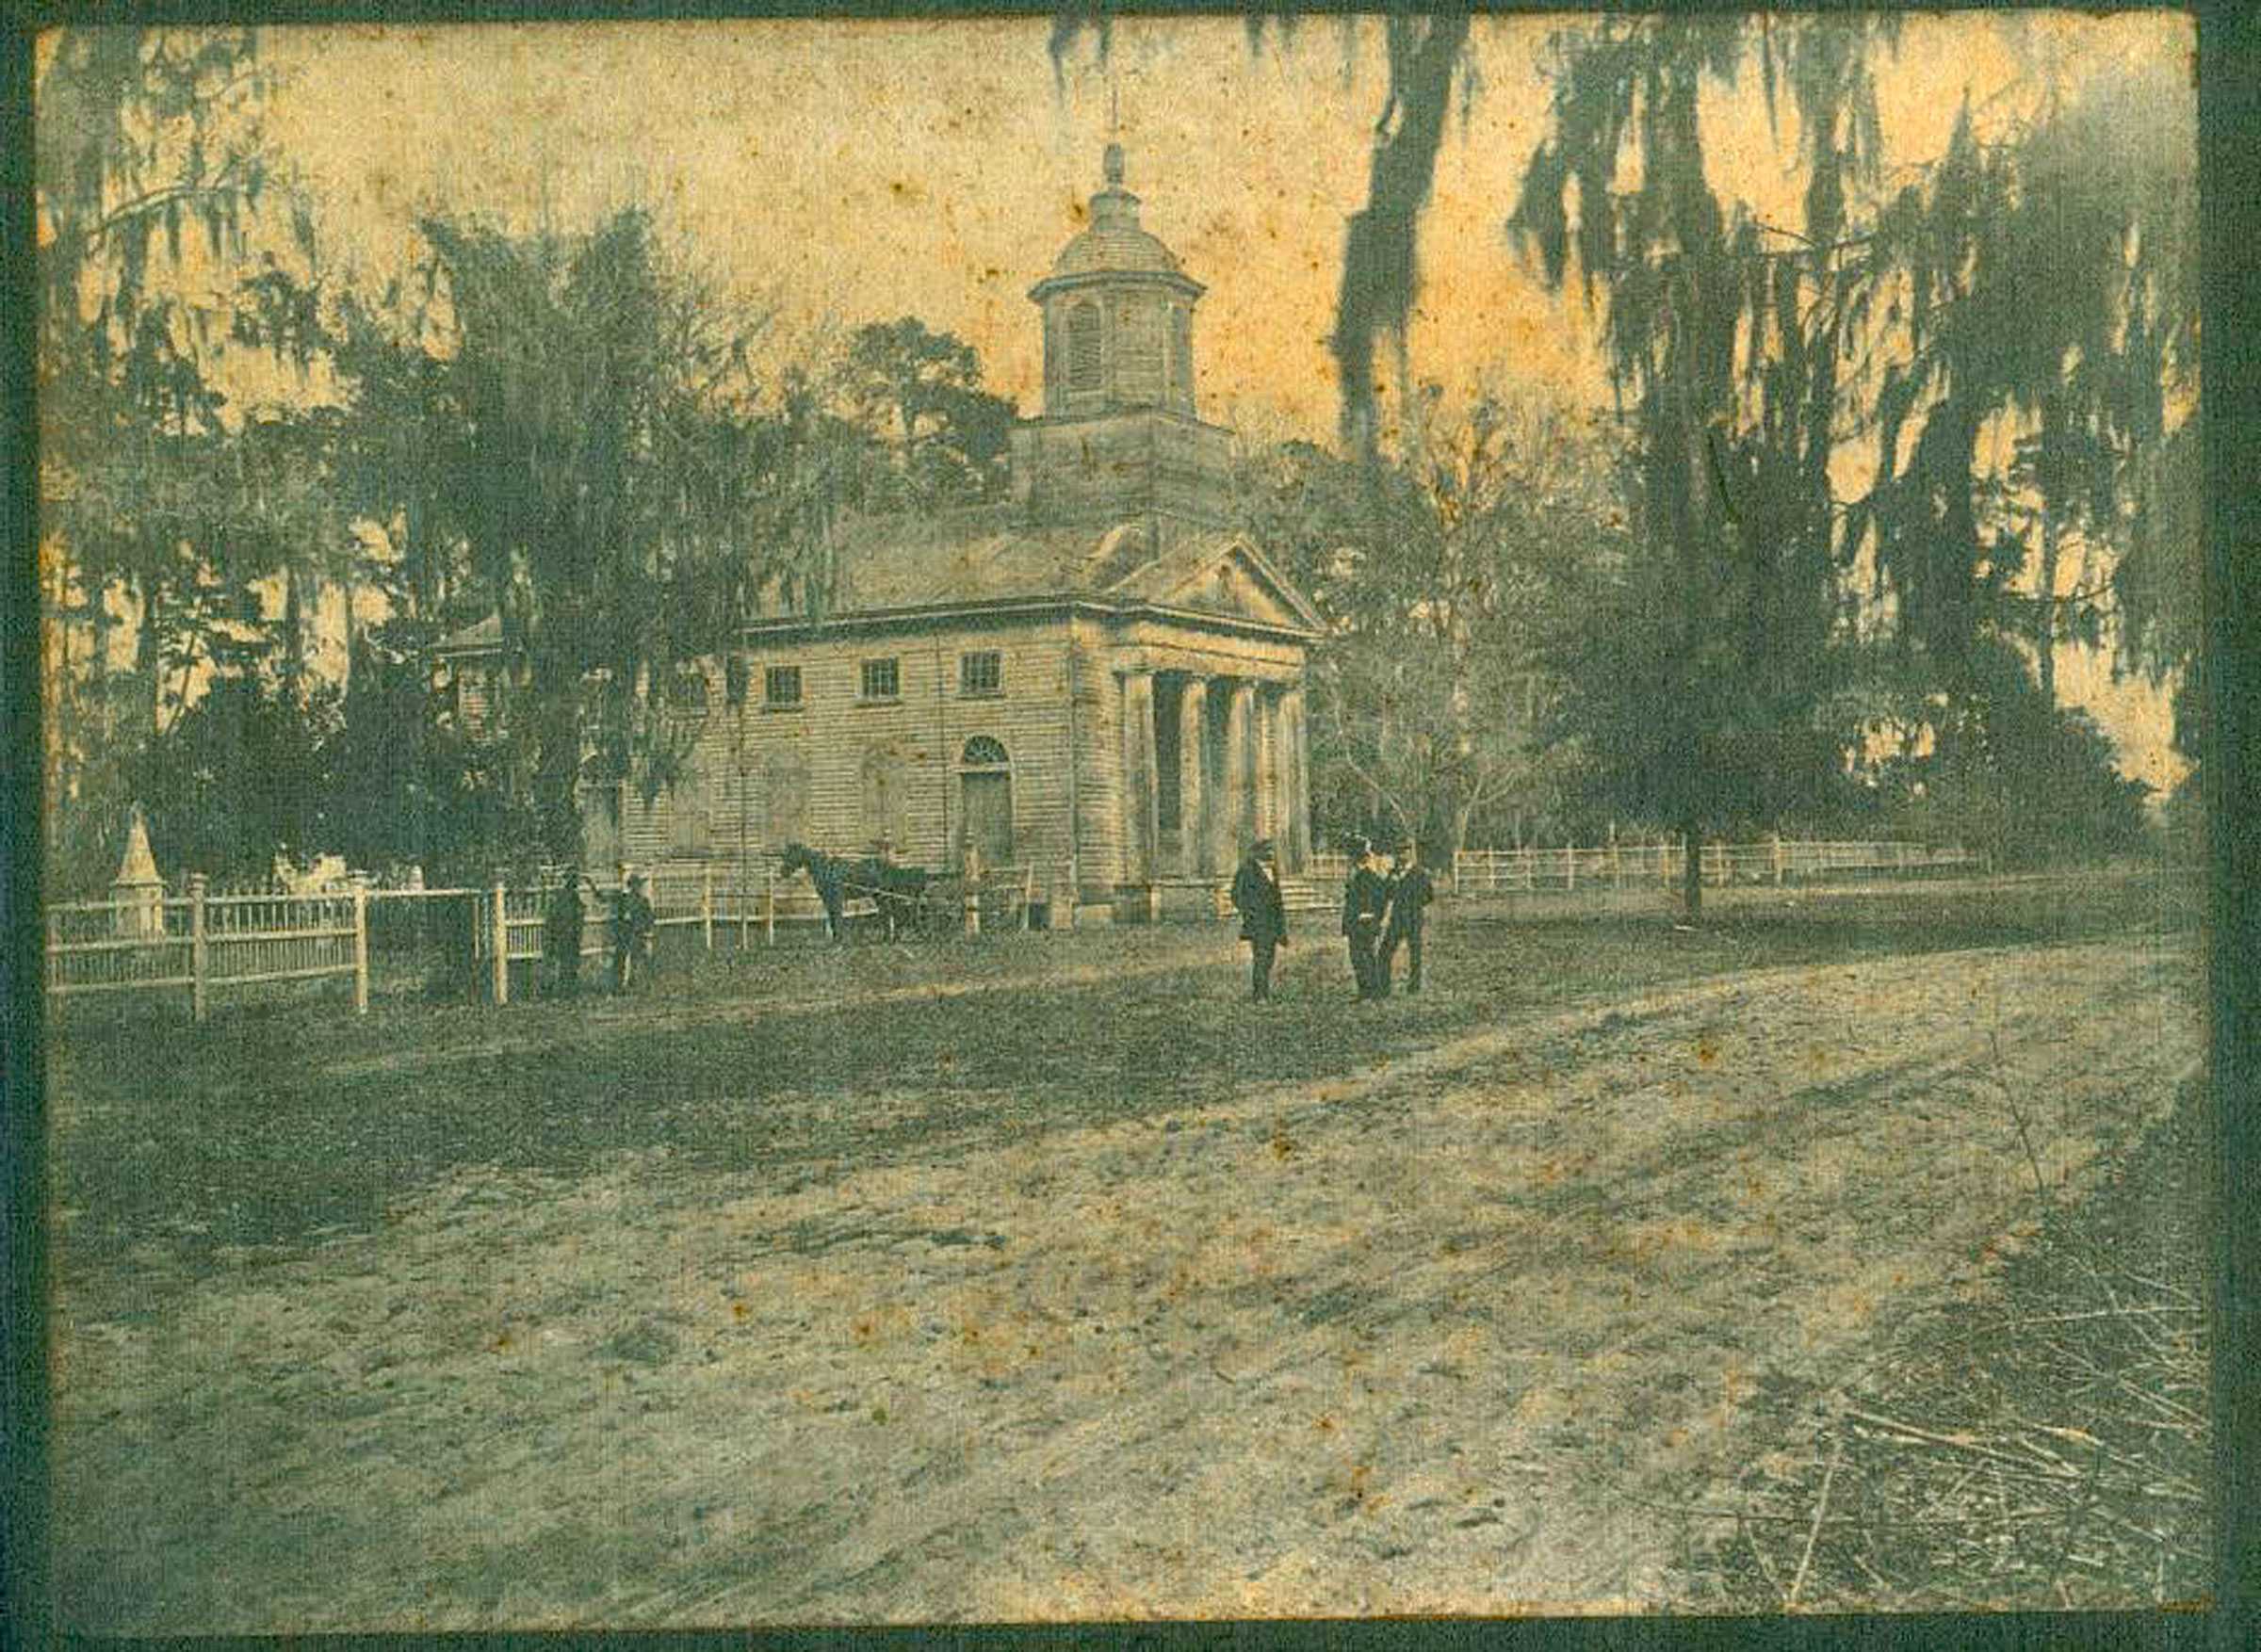 A yellowed black and white photo of the Presbyterian church and a dirt road.